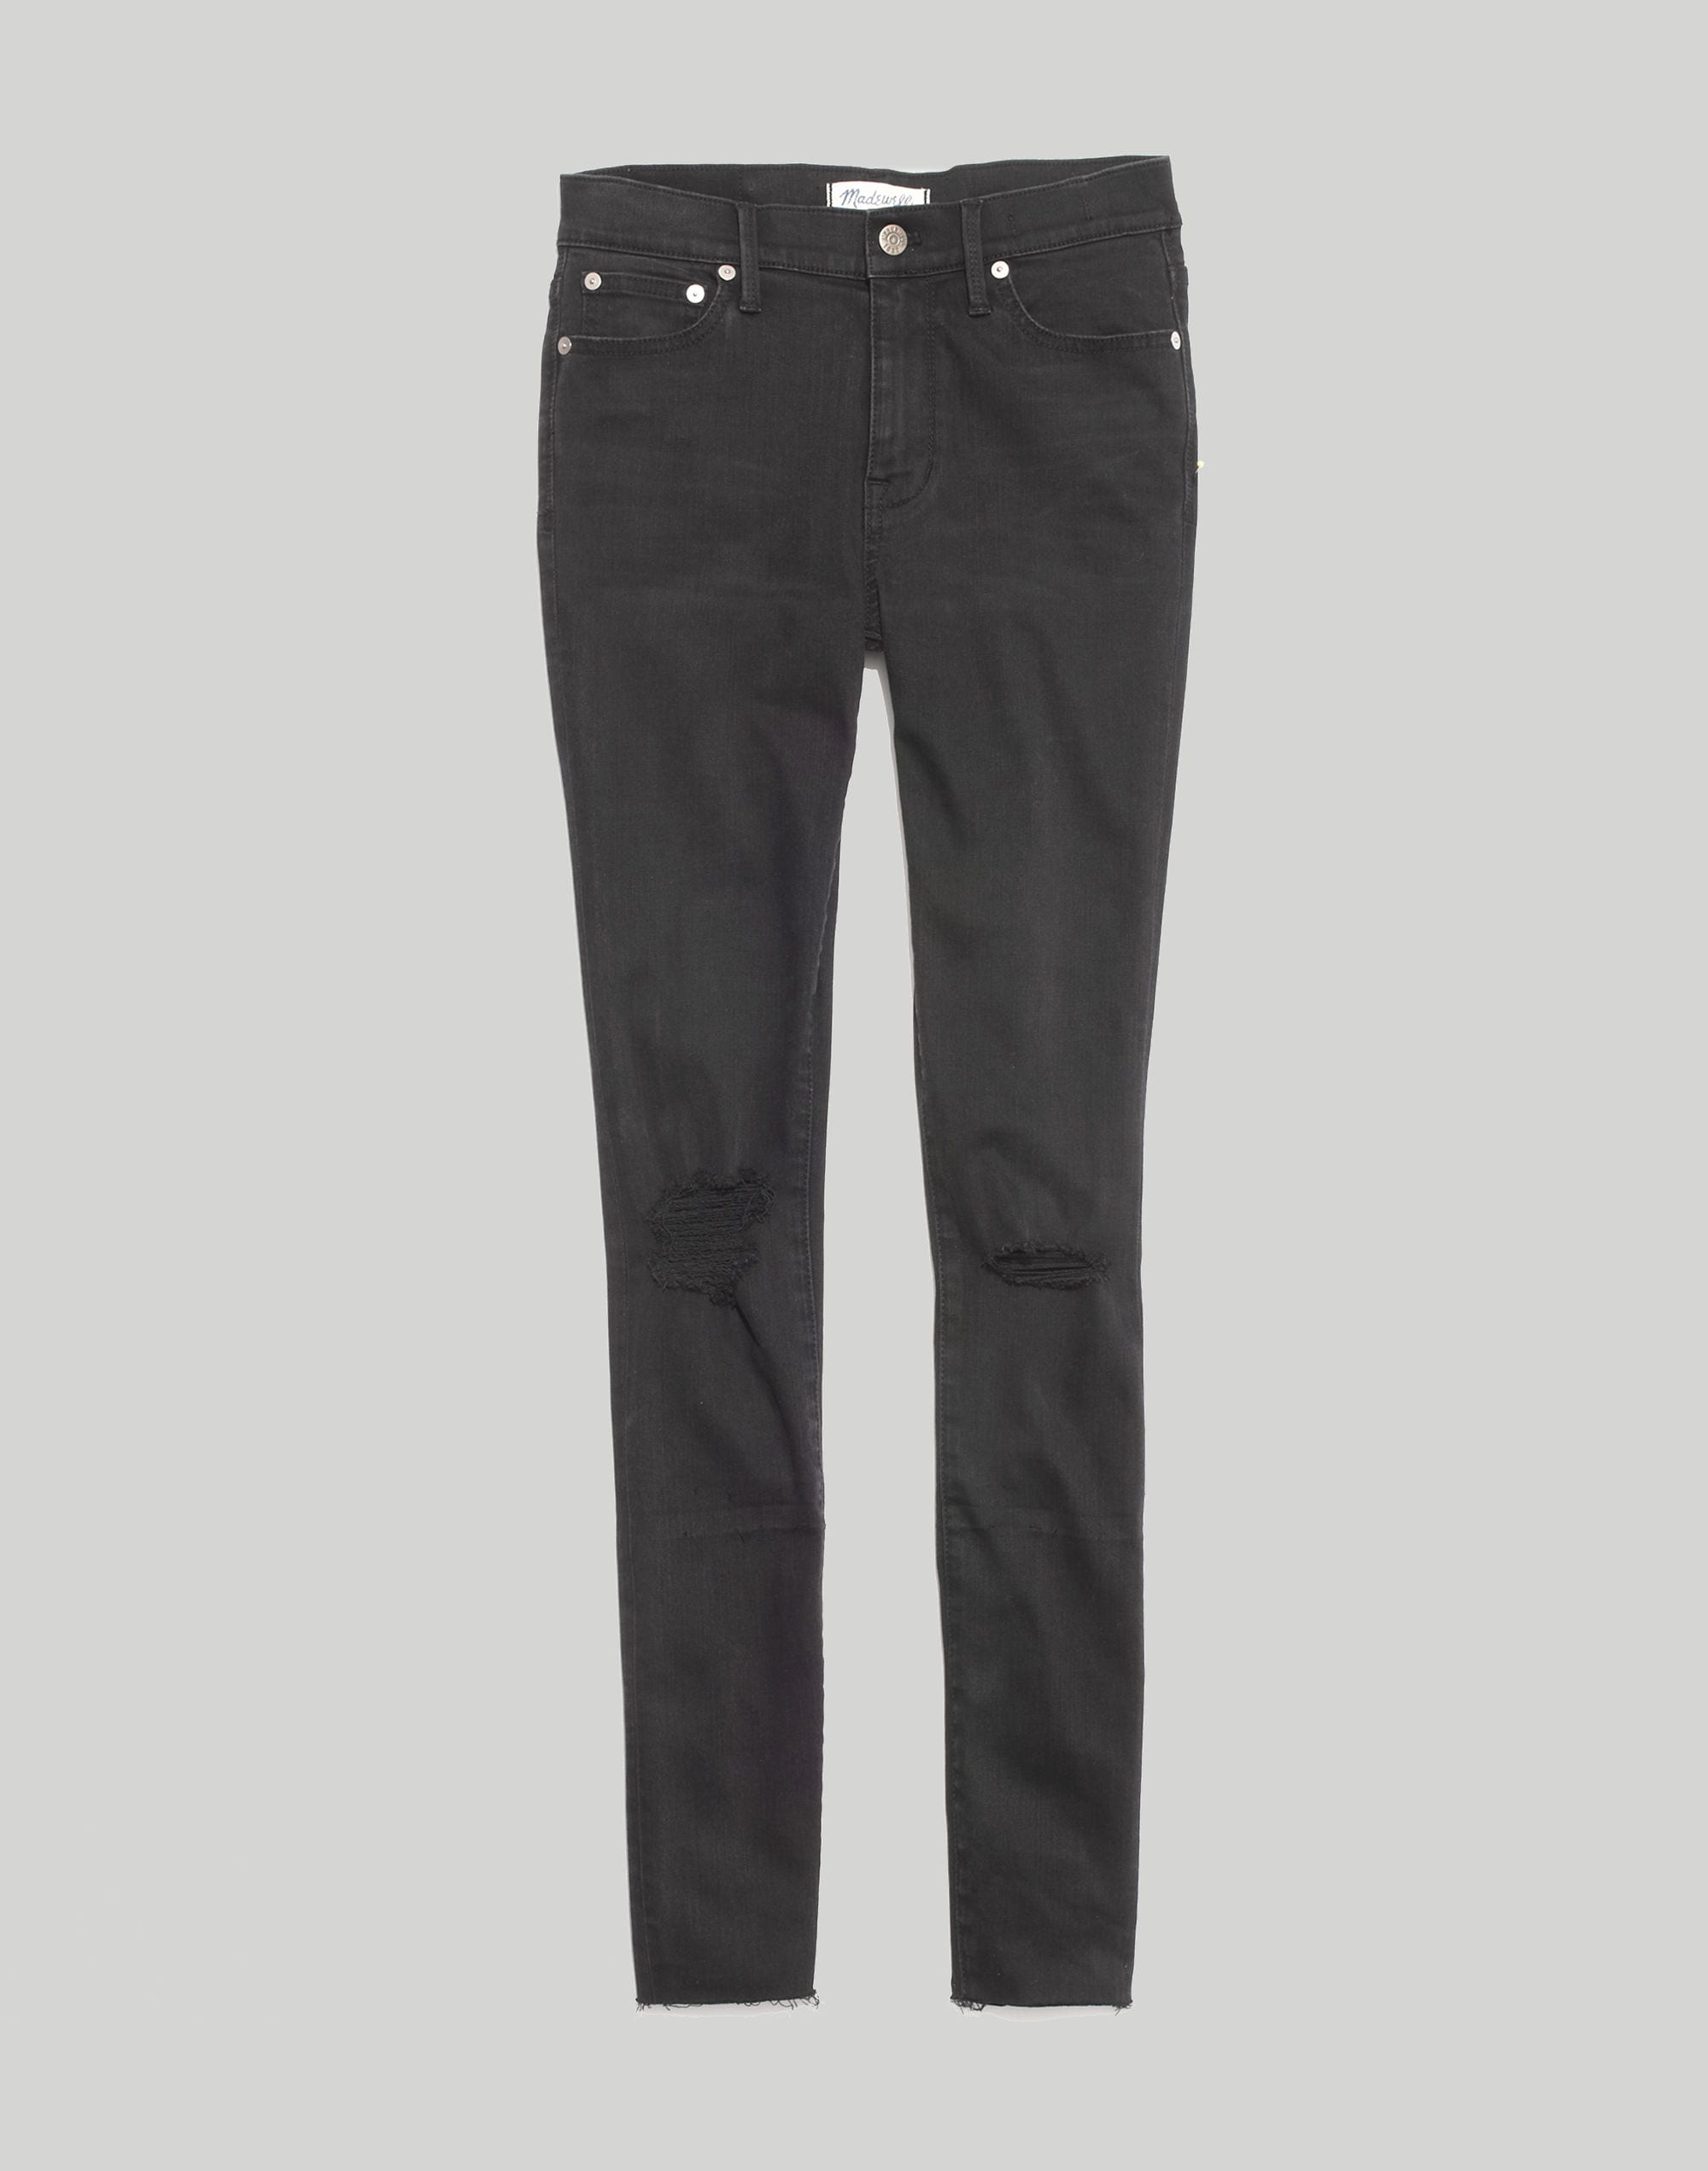  Madewell 9 Mid-Rise Skinny Jeans in Larkspur Wash: Tencel™  Denim Edition Larkspur 37 28.5 : Clothing, Shoes & Jewelry